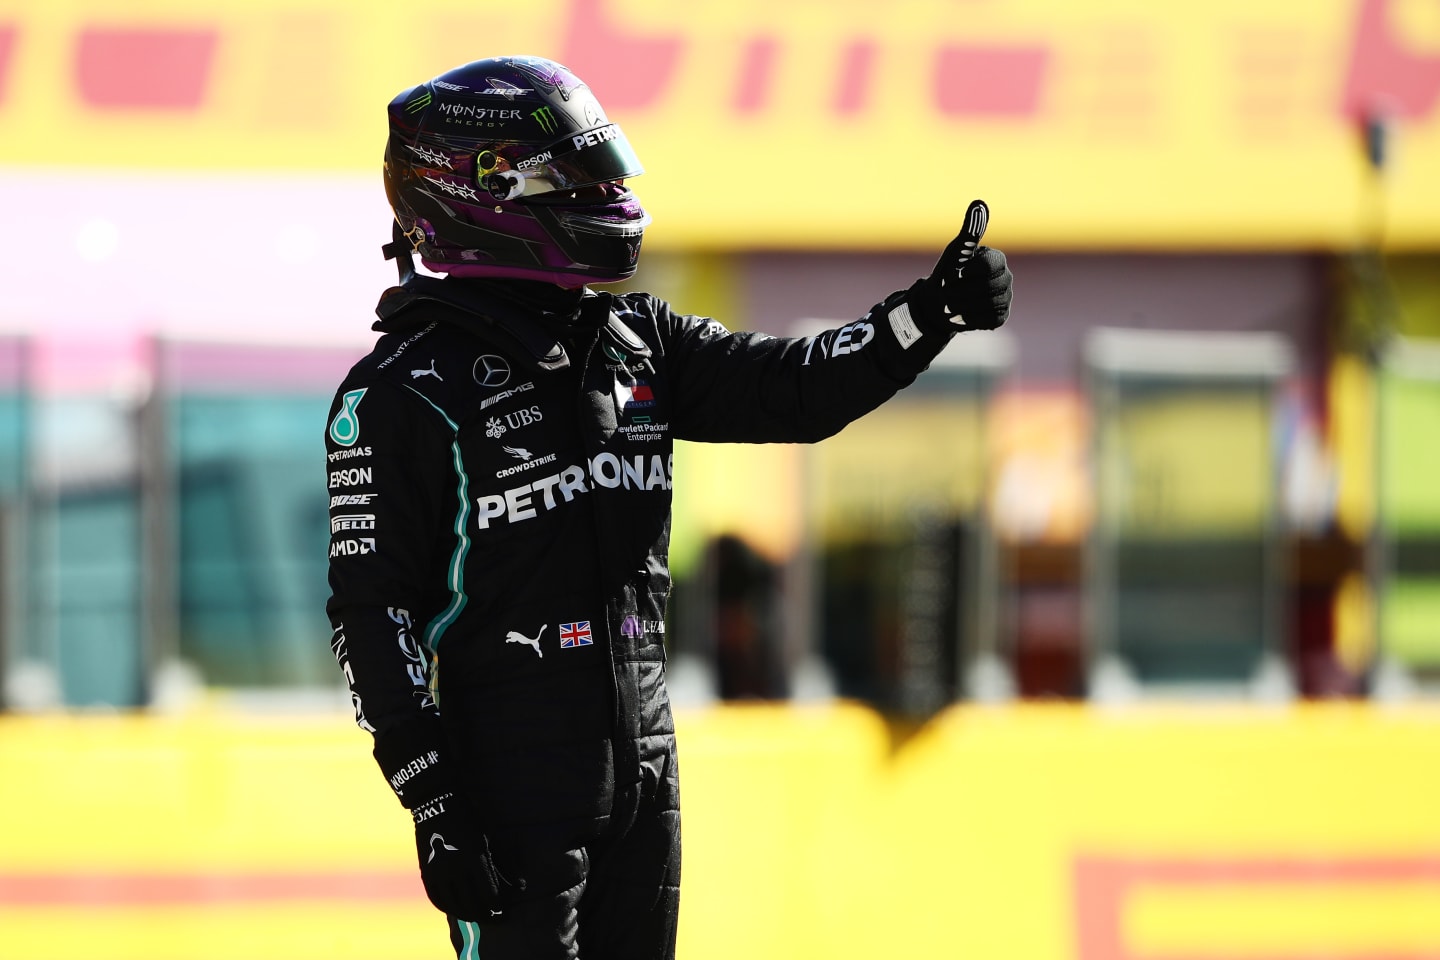 SCARPERIA, ITALY - SEPTEMBER 12: Pole position qualifier Lewis Hamilton of Great Britain and Mercedes GP celebrates in parc ferme during qualifying for the F1 Grand Prix of Tuscany at Mugello Circuit on September 12, 2020 in Scarperia, Italy. (Photo by Bryn Lennon/Getty Images)